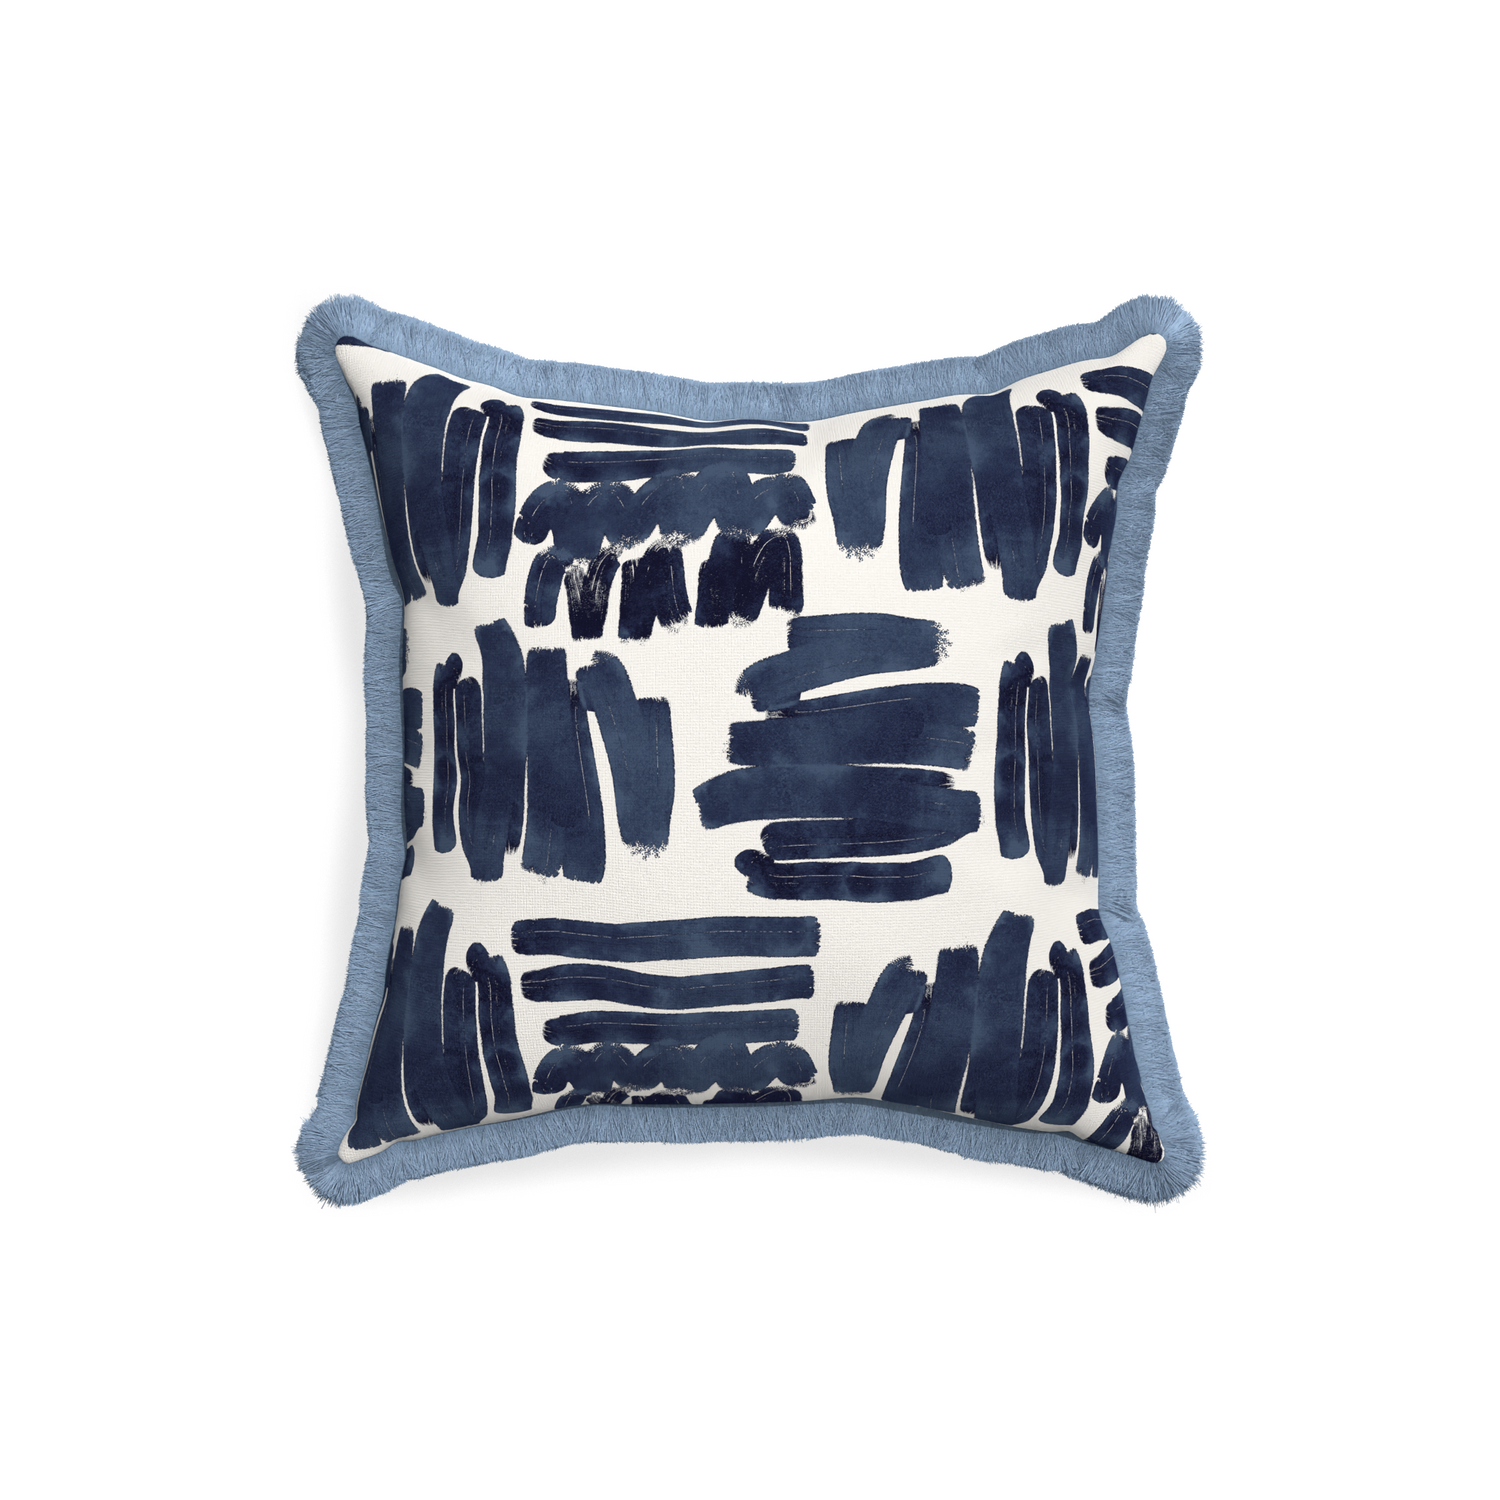 18-square warby custom pillow with sky fringe on white background